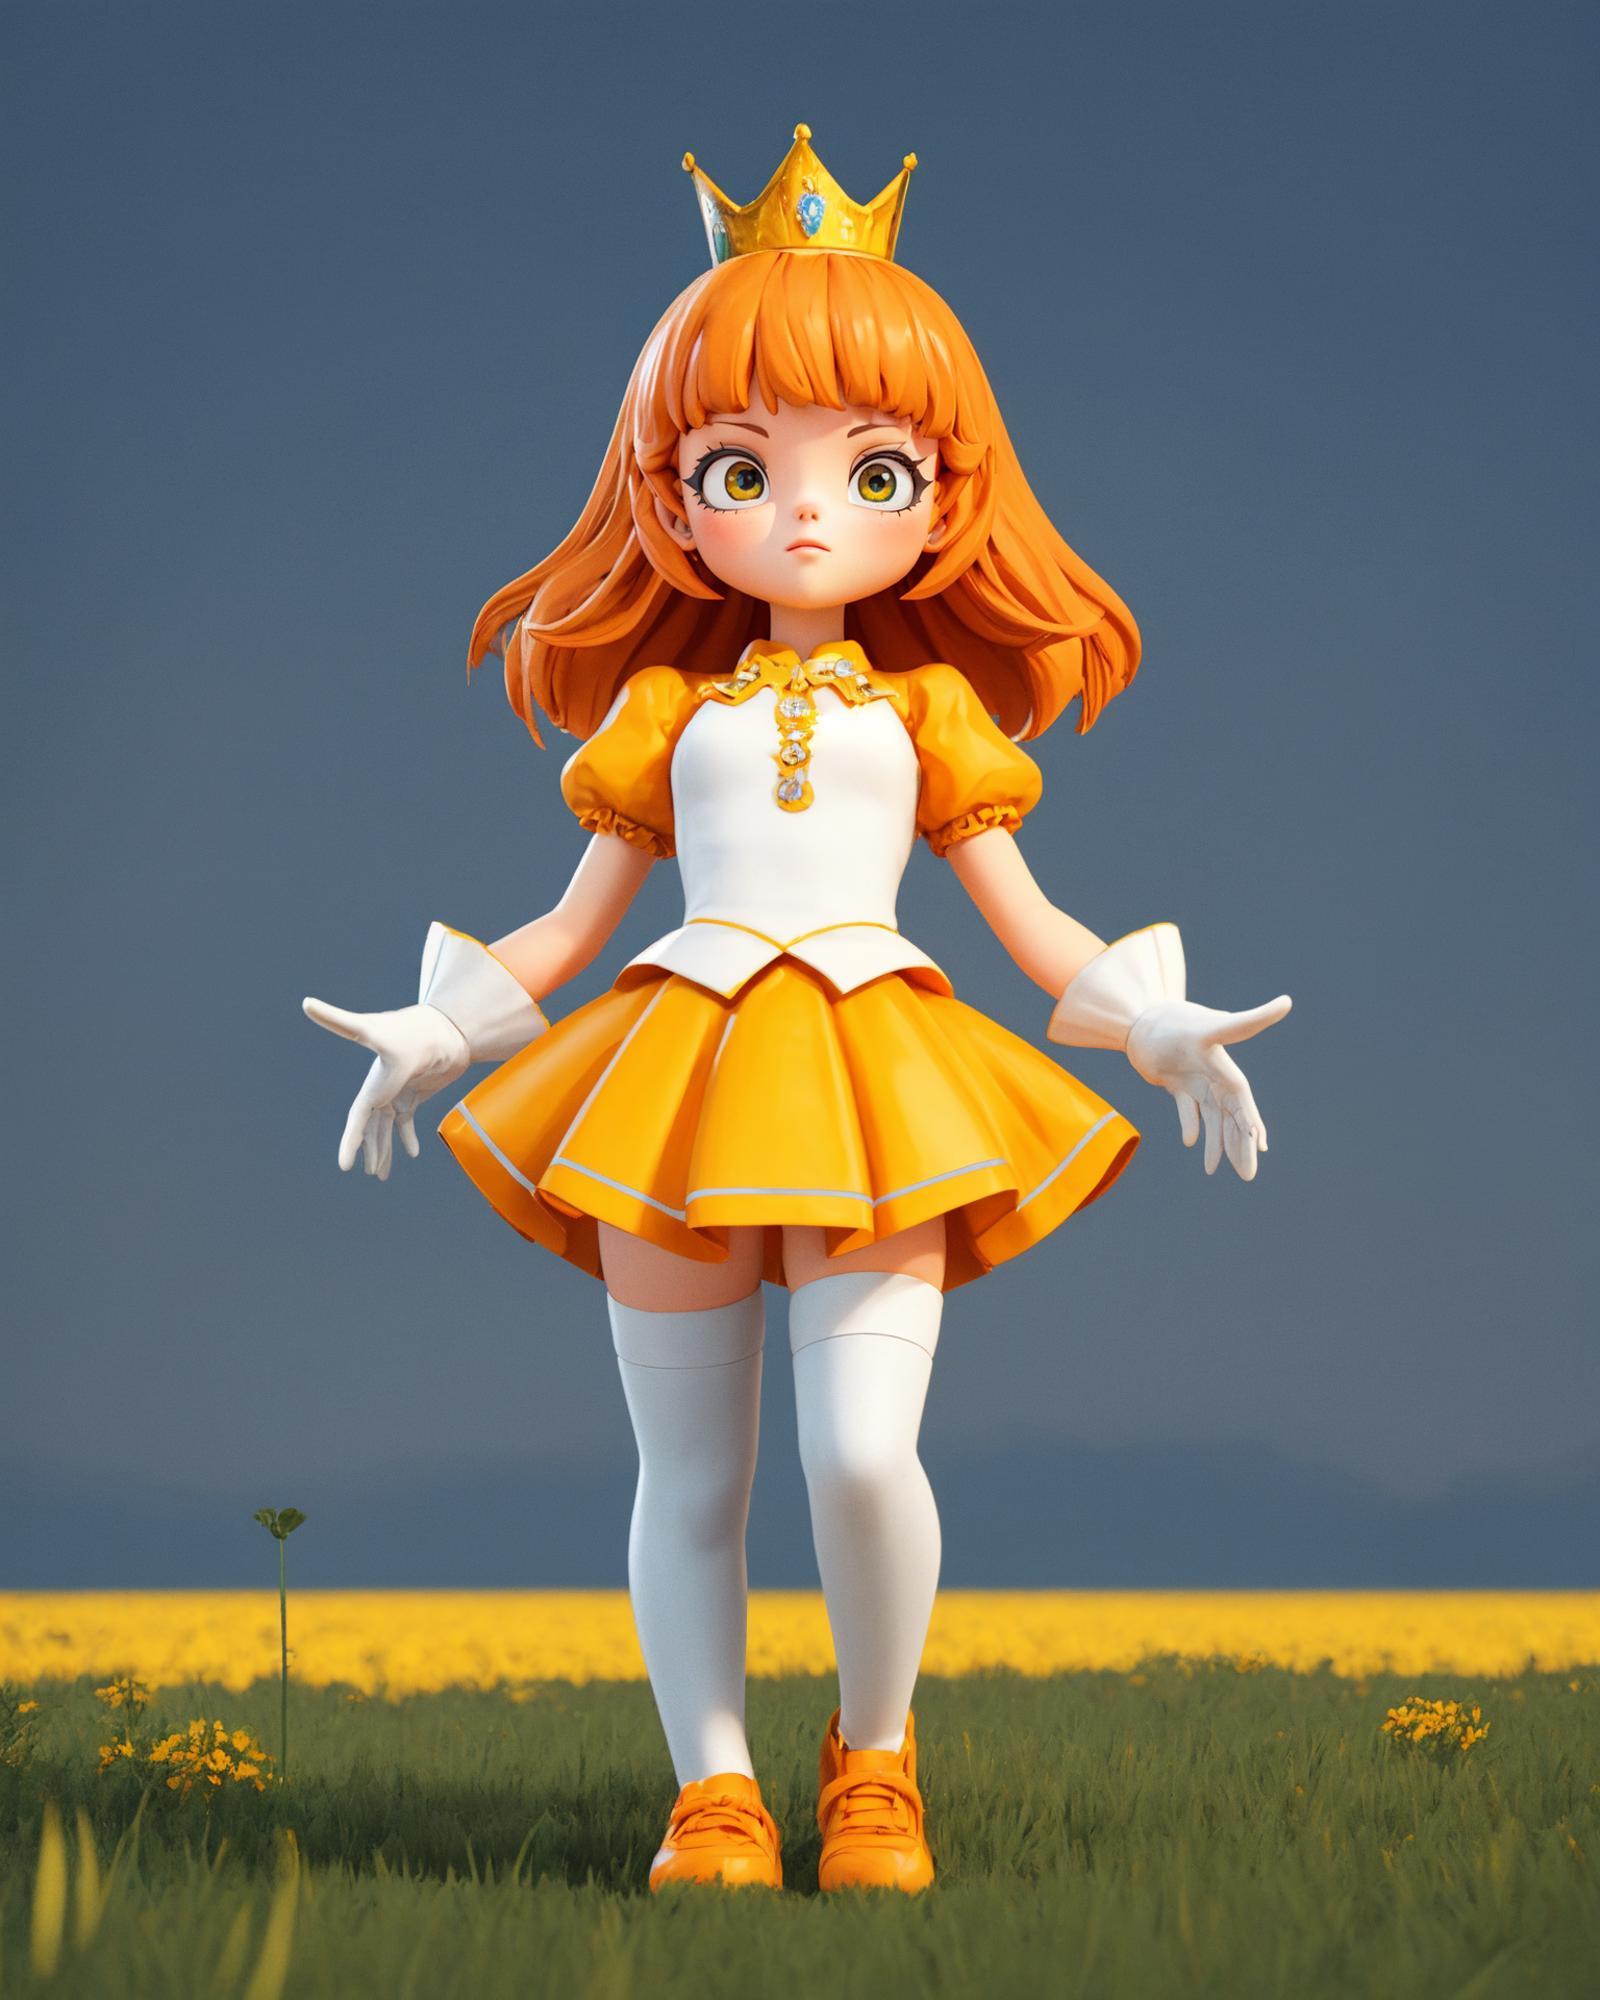 A doll wearing a yellow dress and white gloves, standing in a field of flowers.